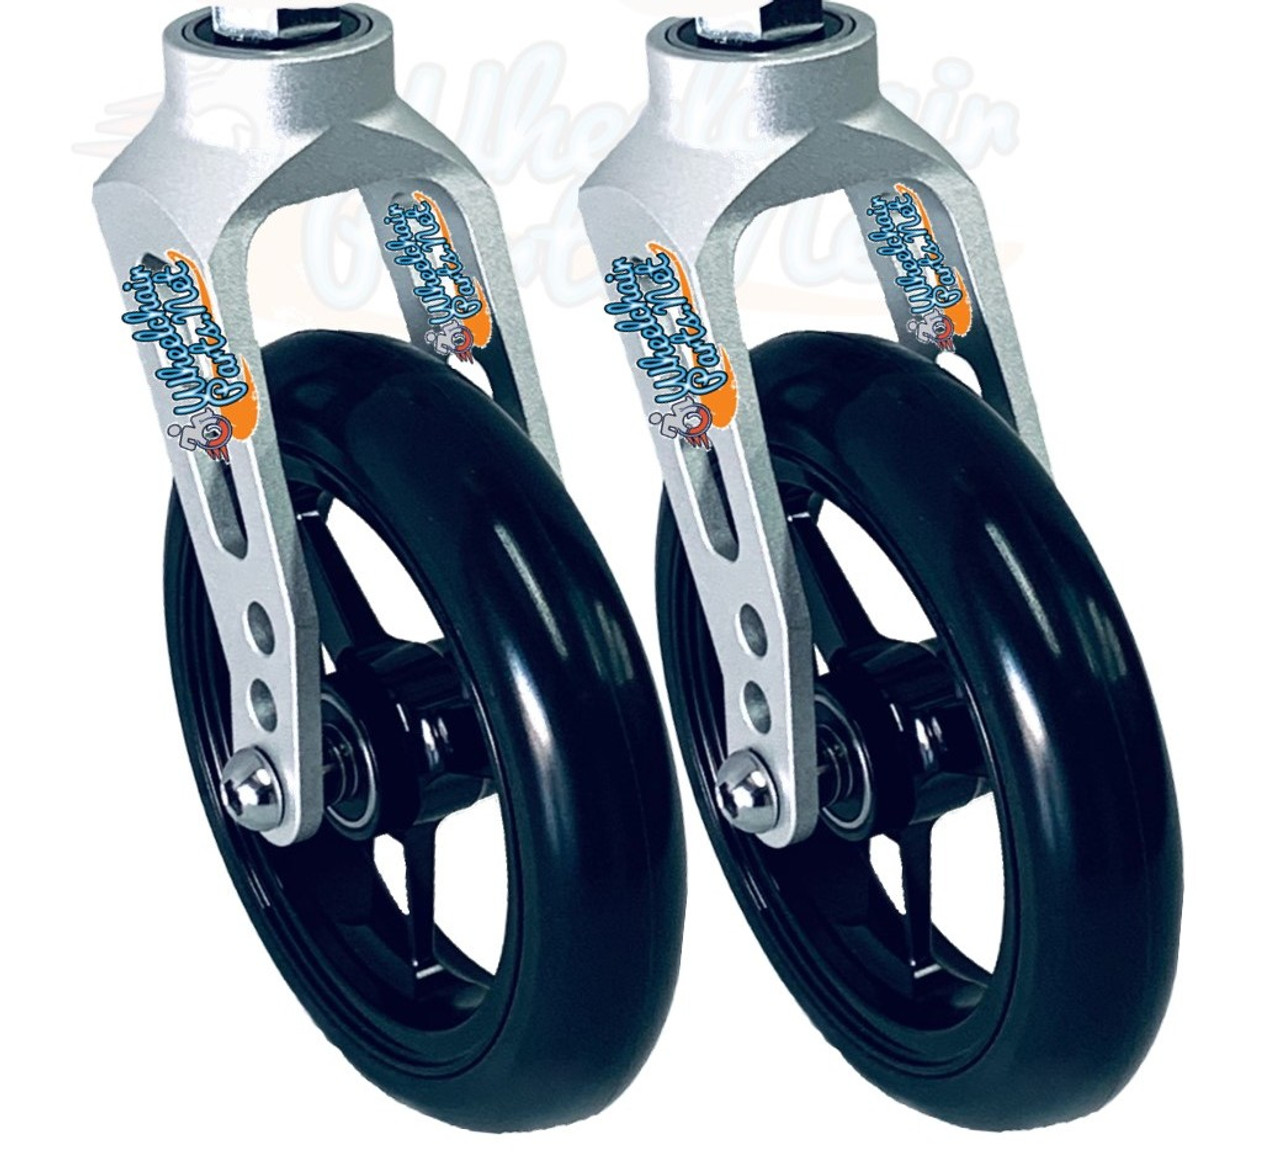 Aluminum Caster Fork (Silver) Assembly With Wheels. Choose Your Wheel Size